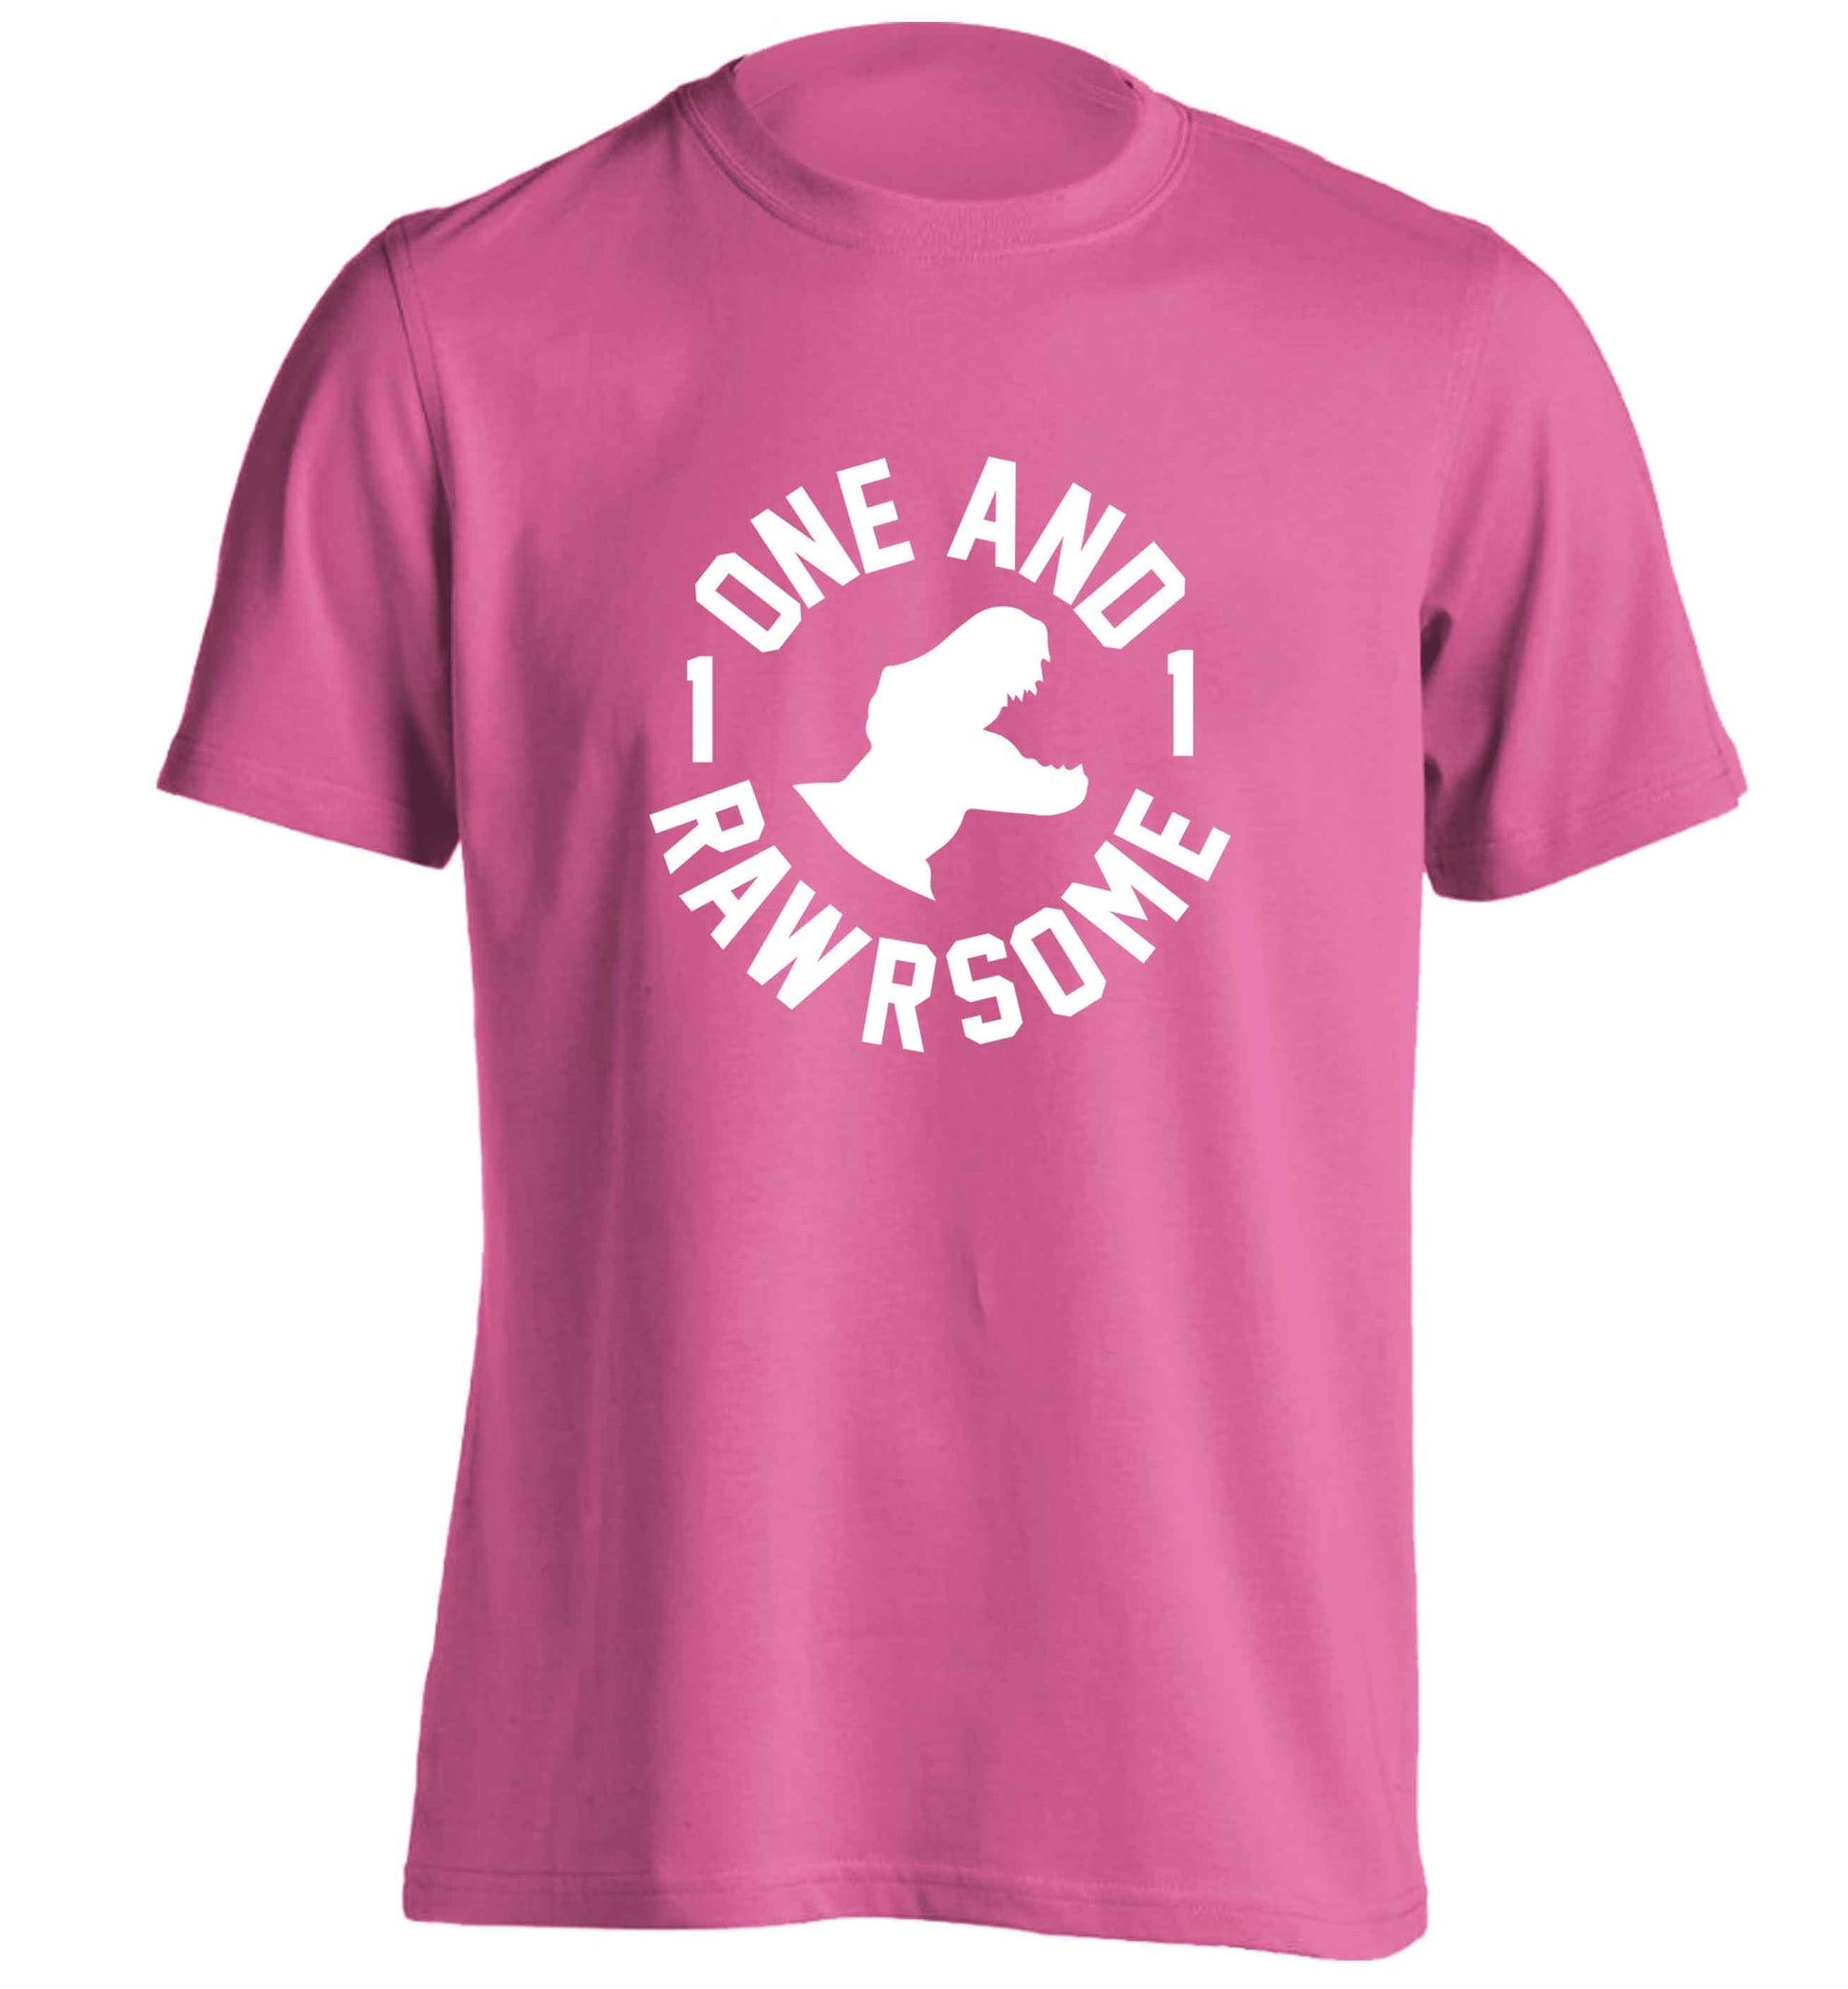 One and Rawrsome adults unisex pink Tshirt 2XL